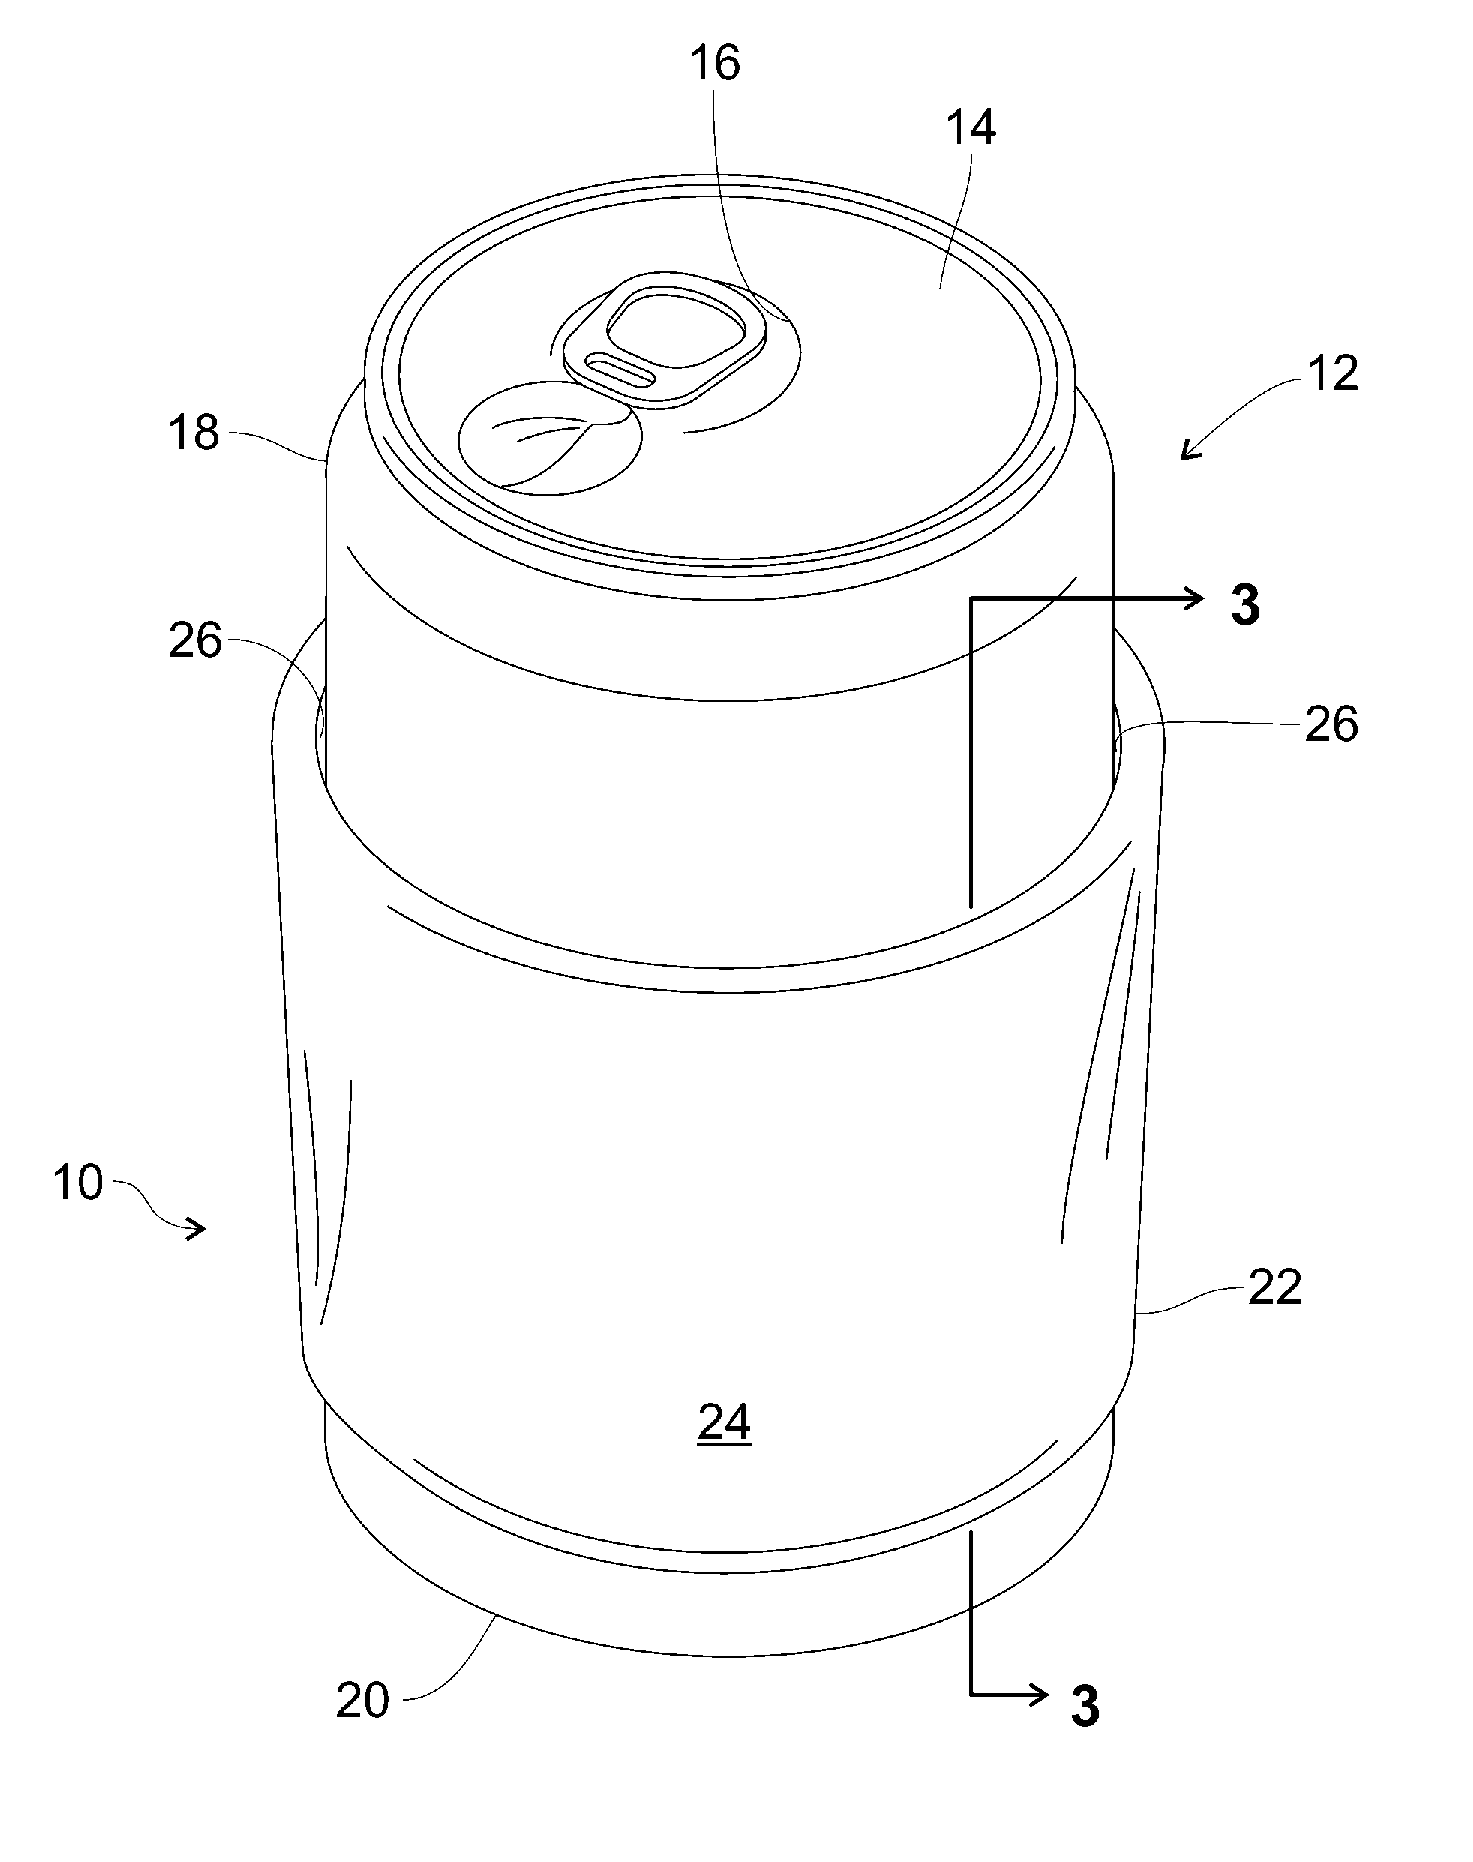 Insulator for a Beverage Container